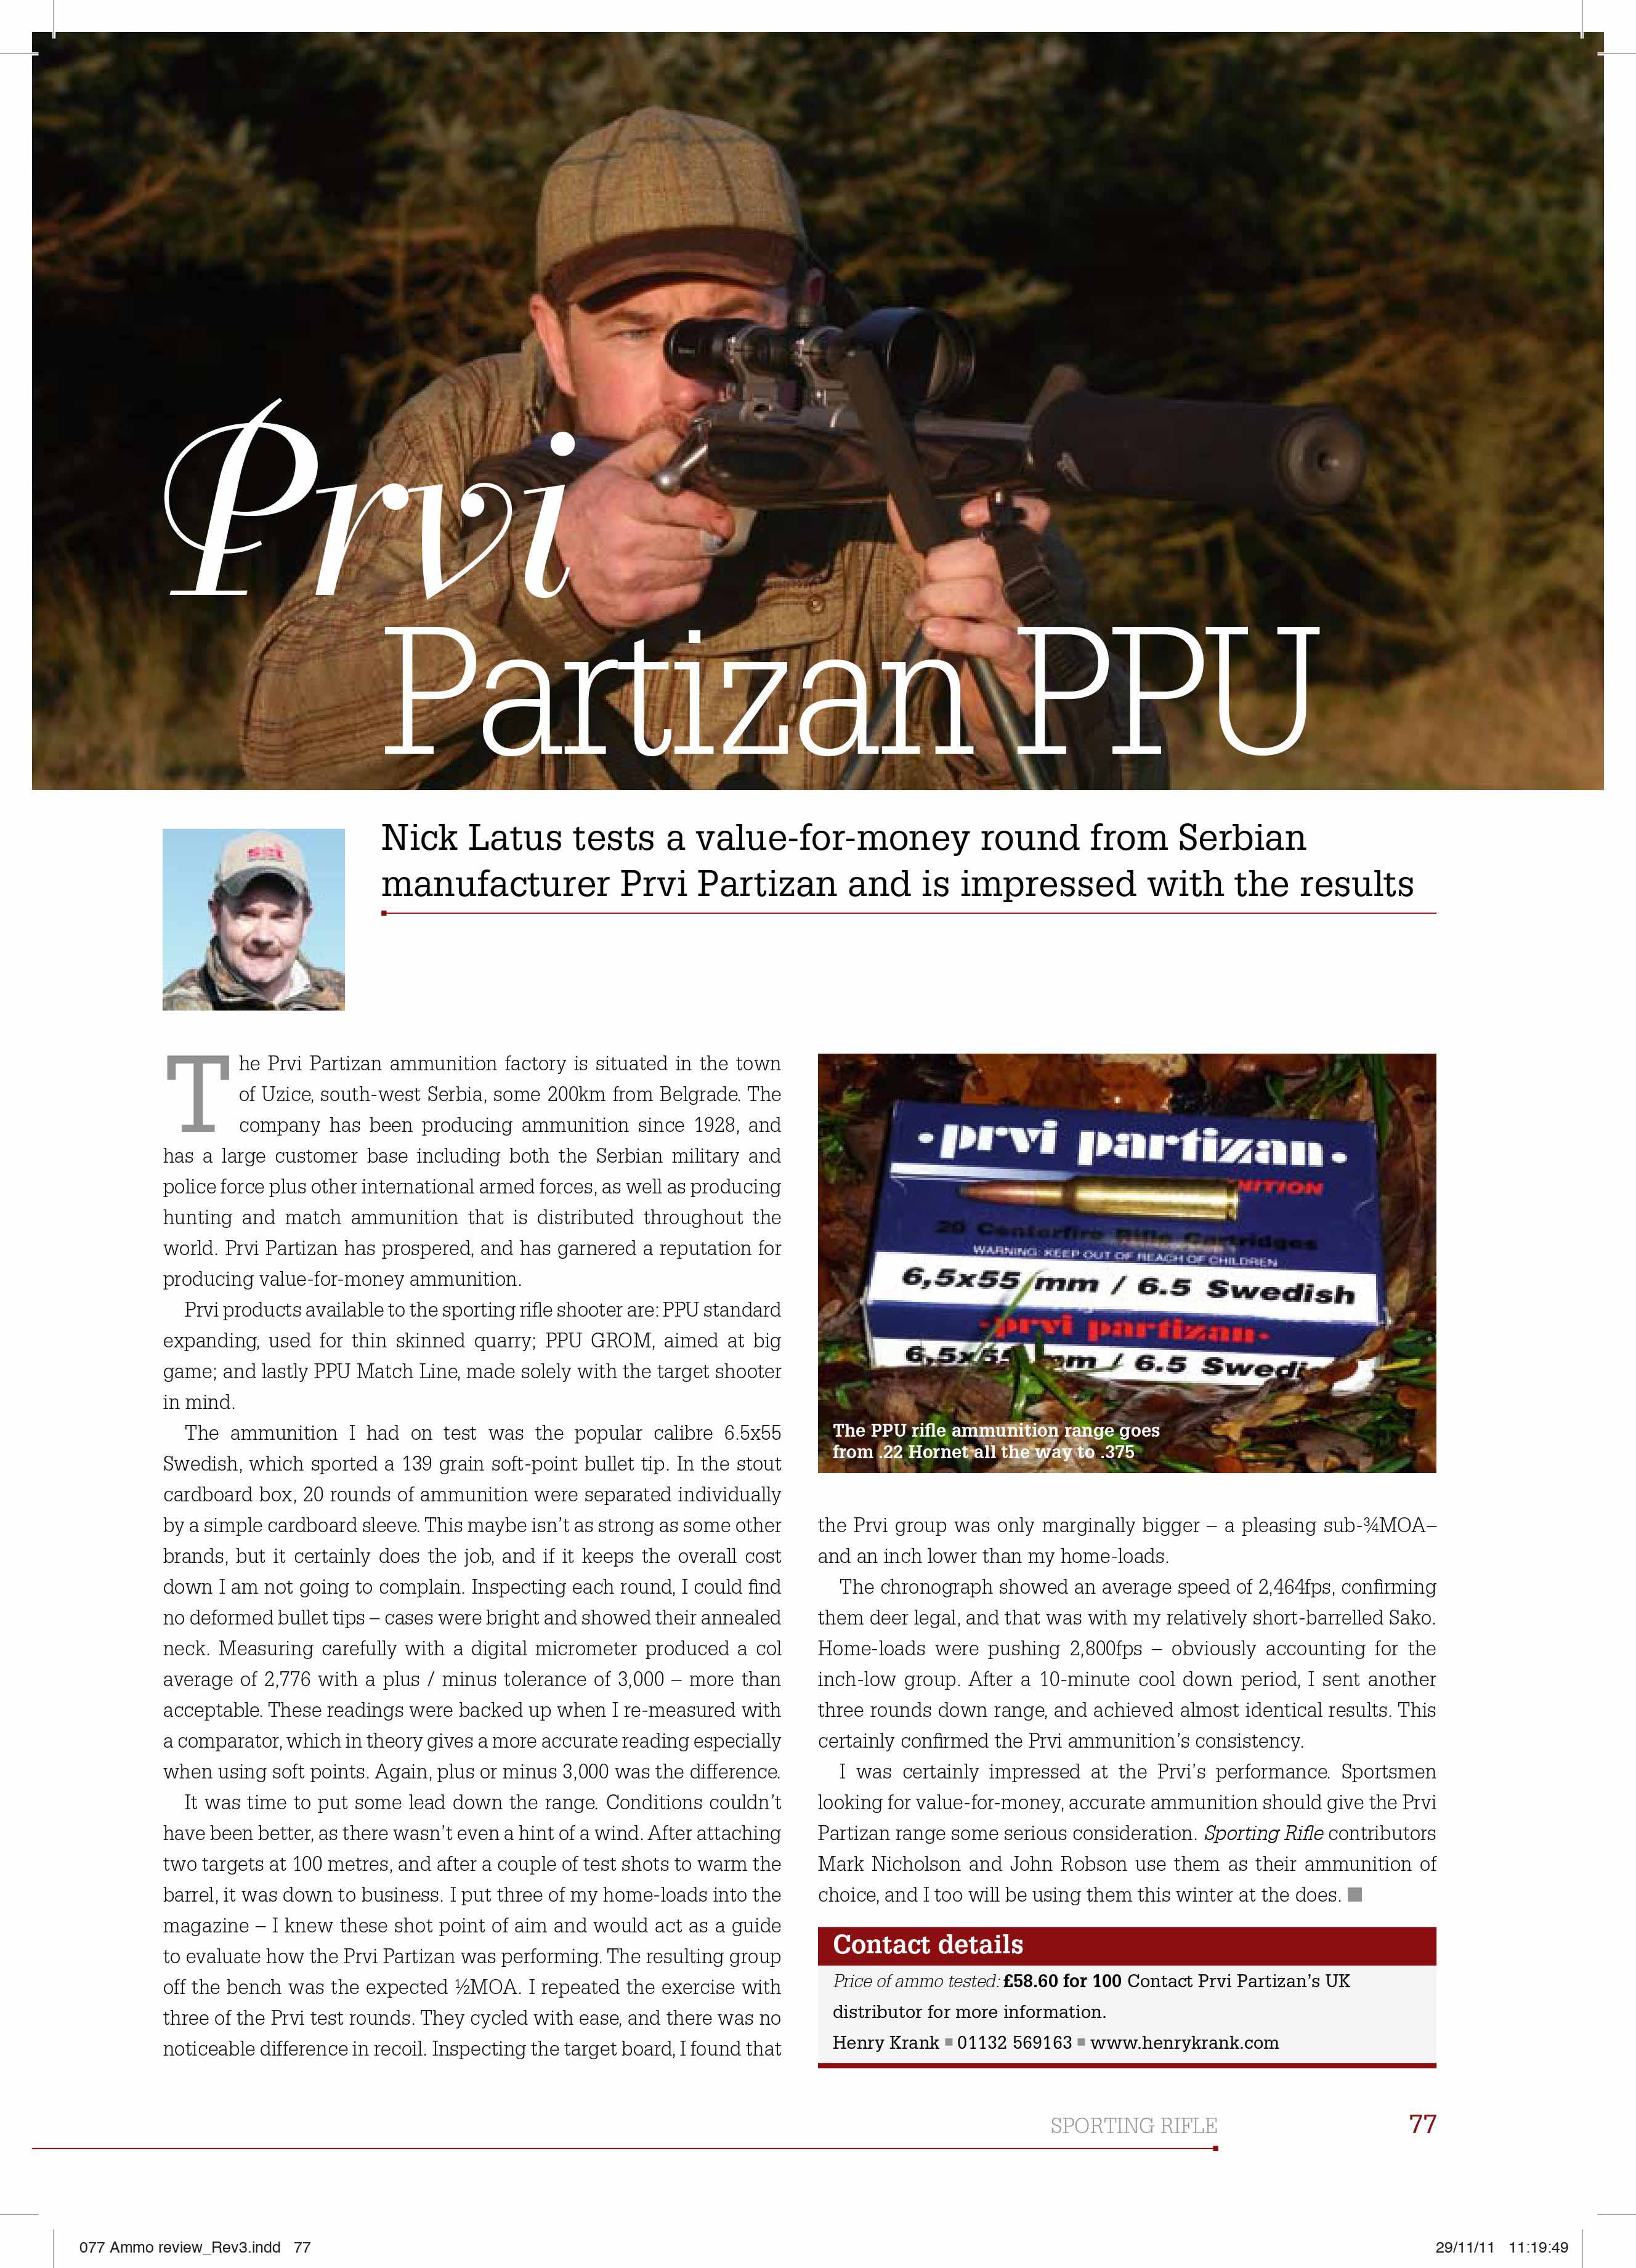 Sporting Rifle Article PPU On Test Page One